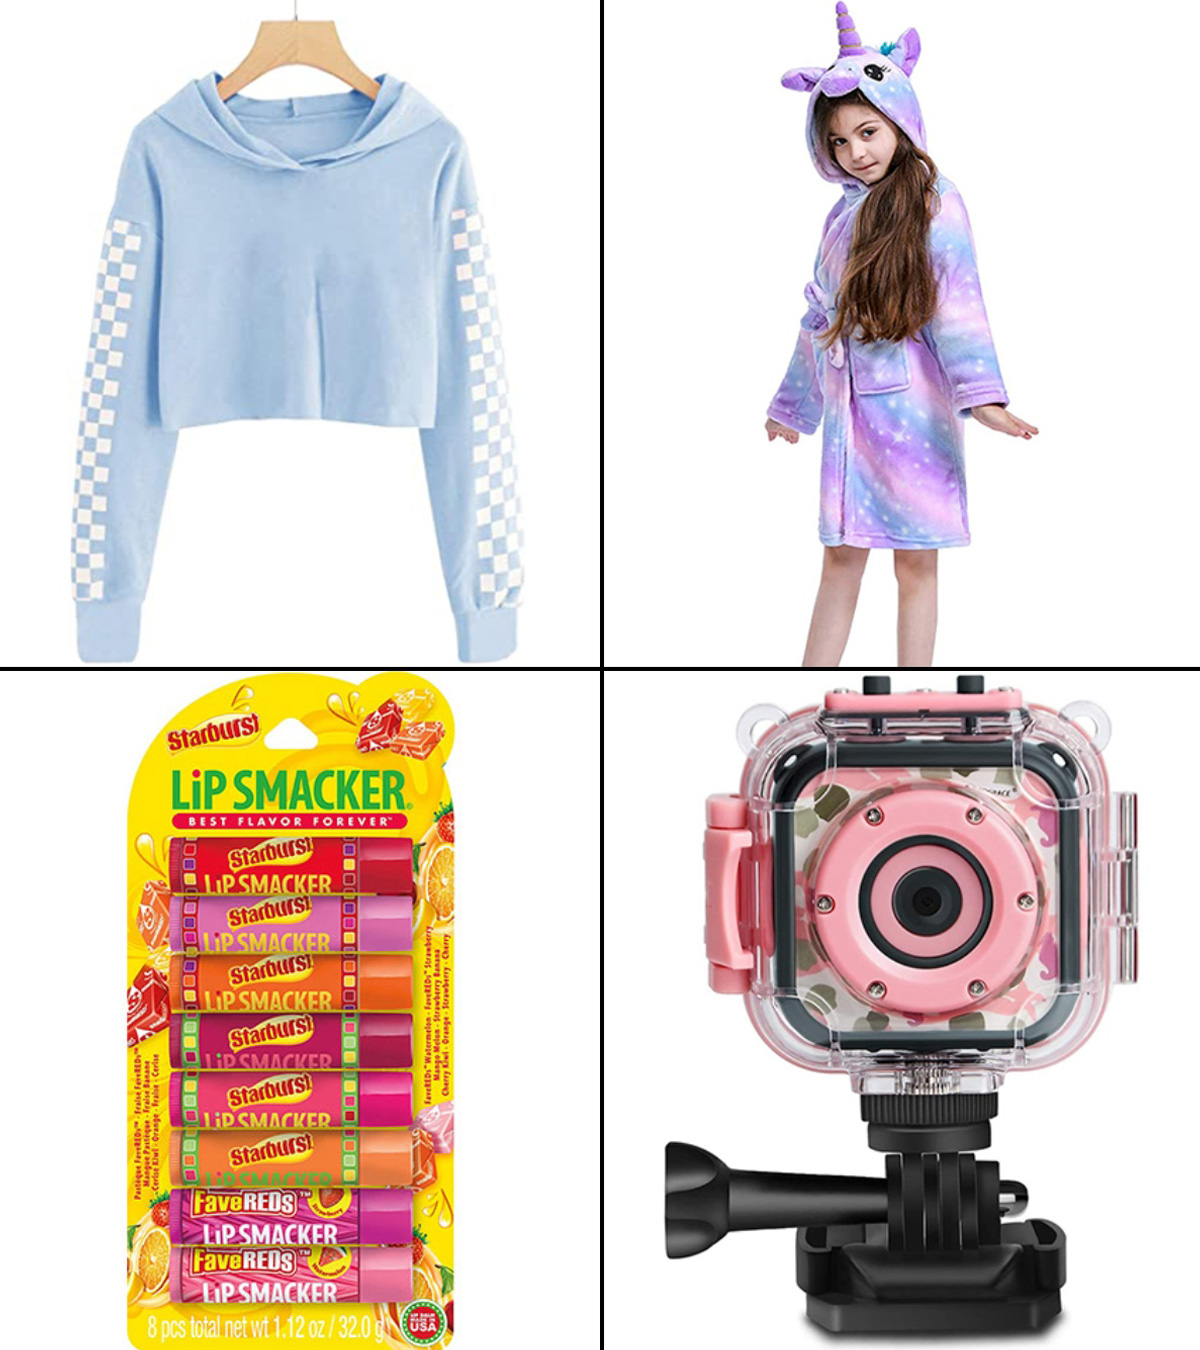 Best Gifts for 10-Year-Old Girls - The Tech Edvocate